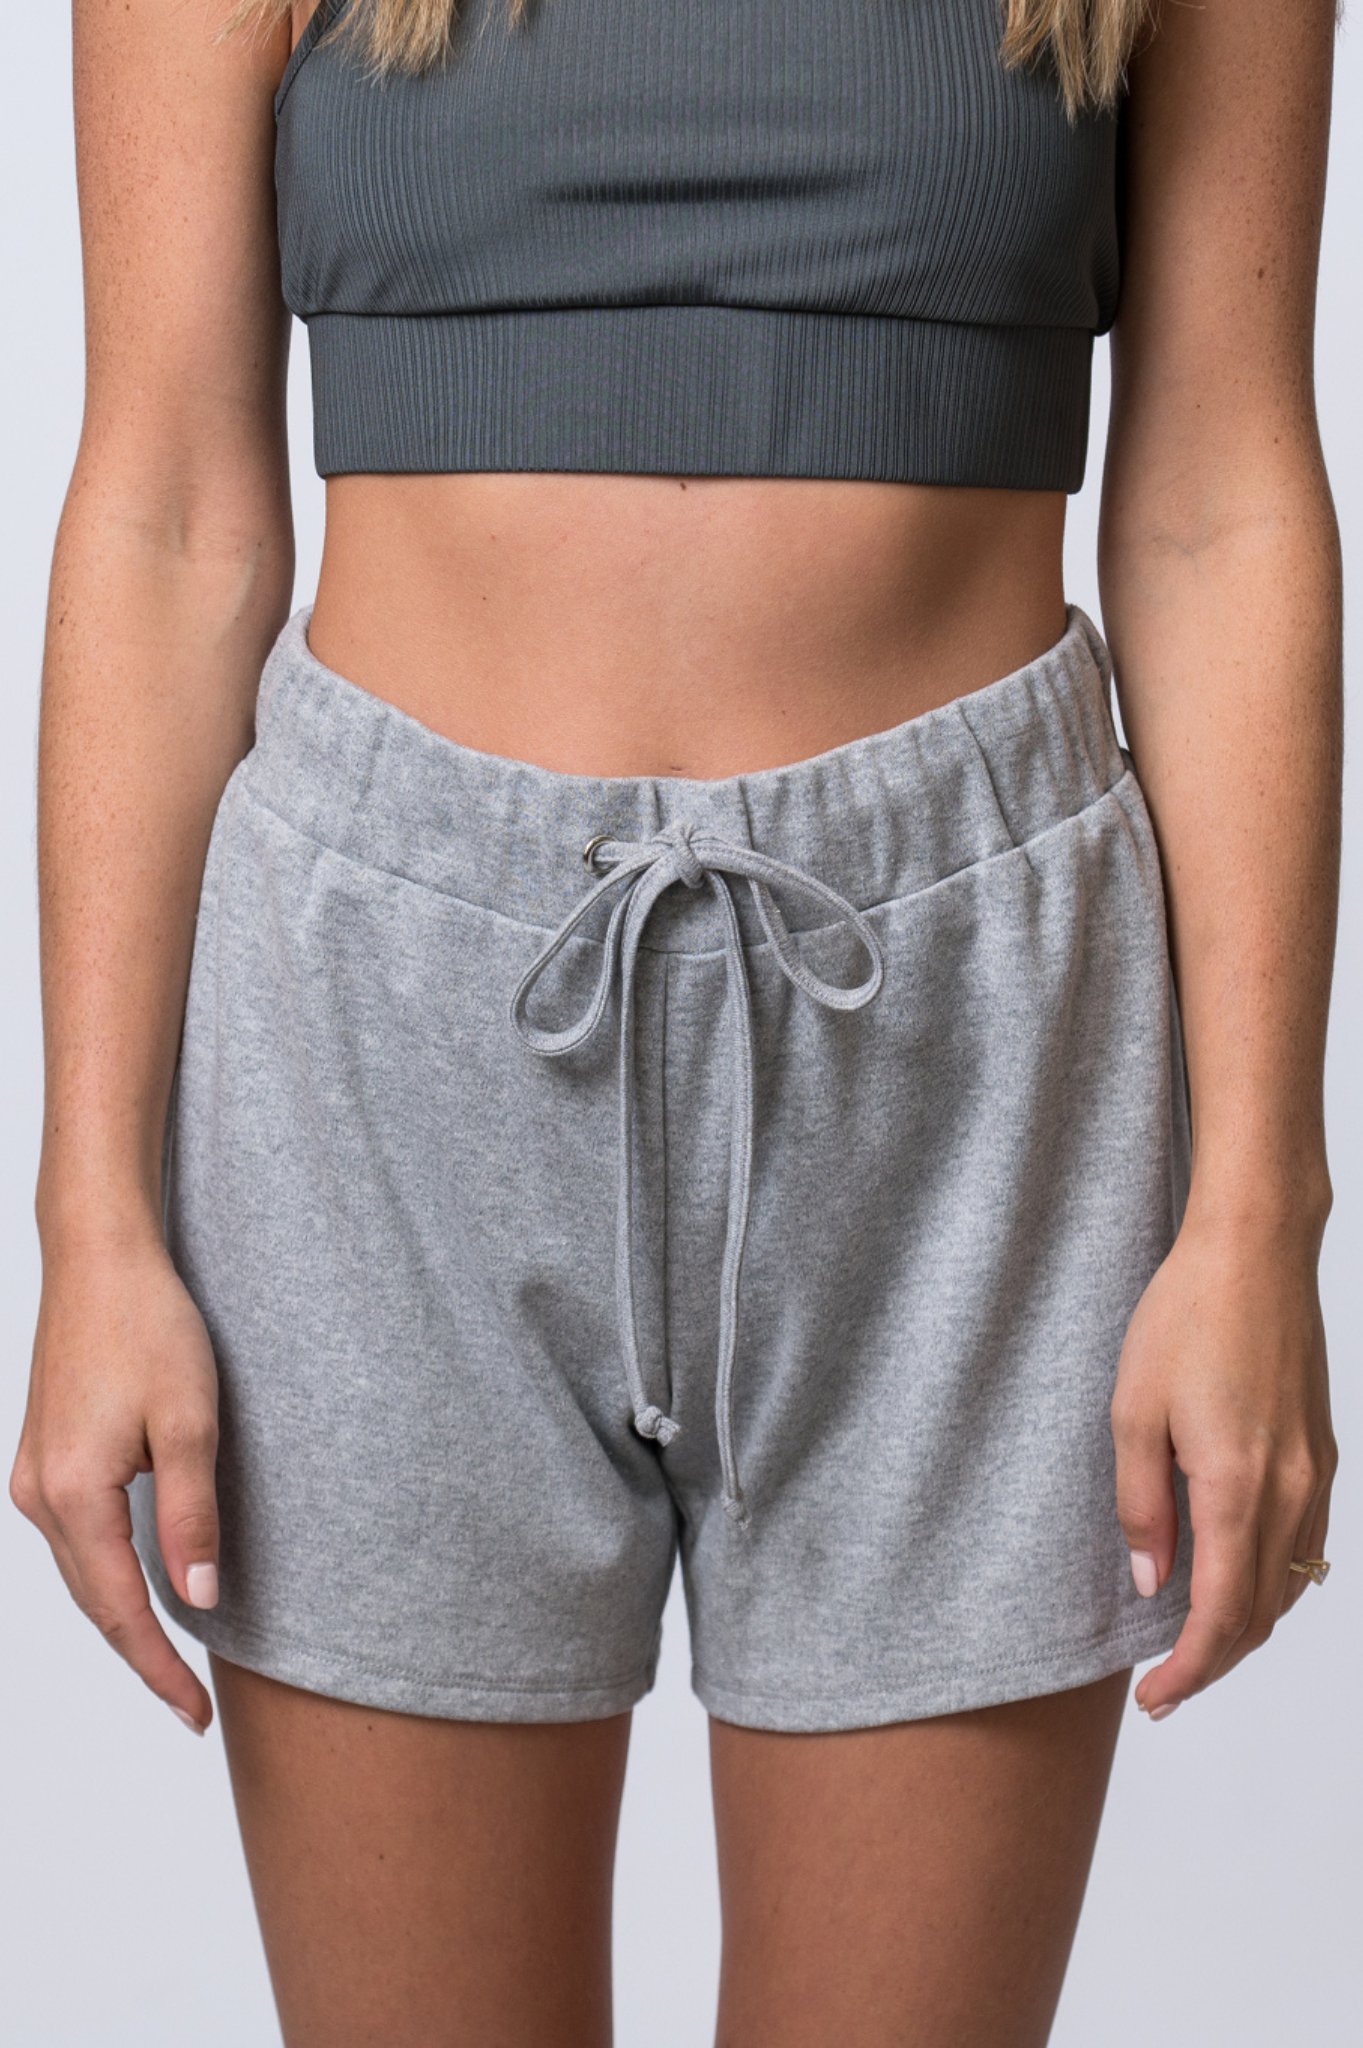 Woman wearing light gray, drawstring sweat shorts and a dark gray, ribbed sports bra. Front of clothing is being shown